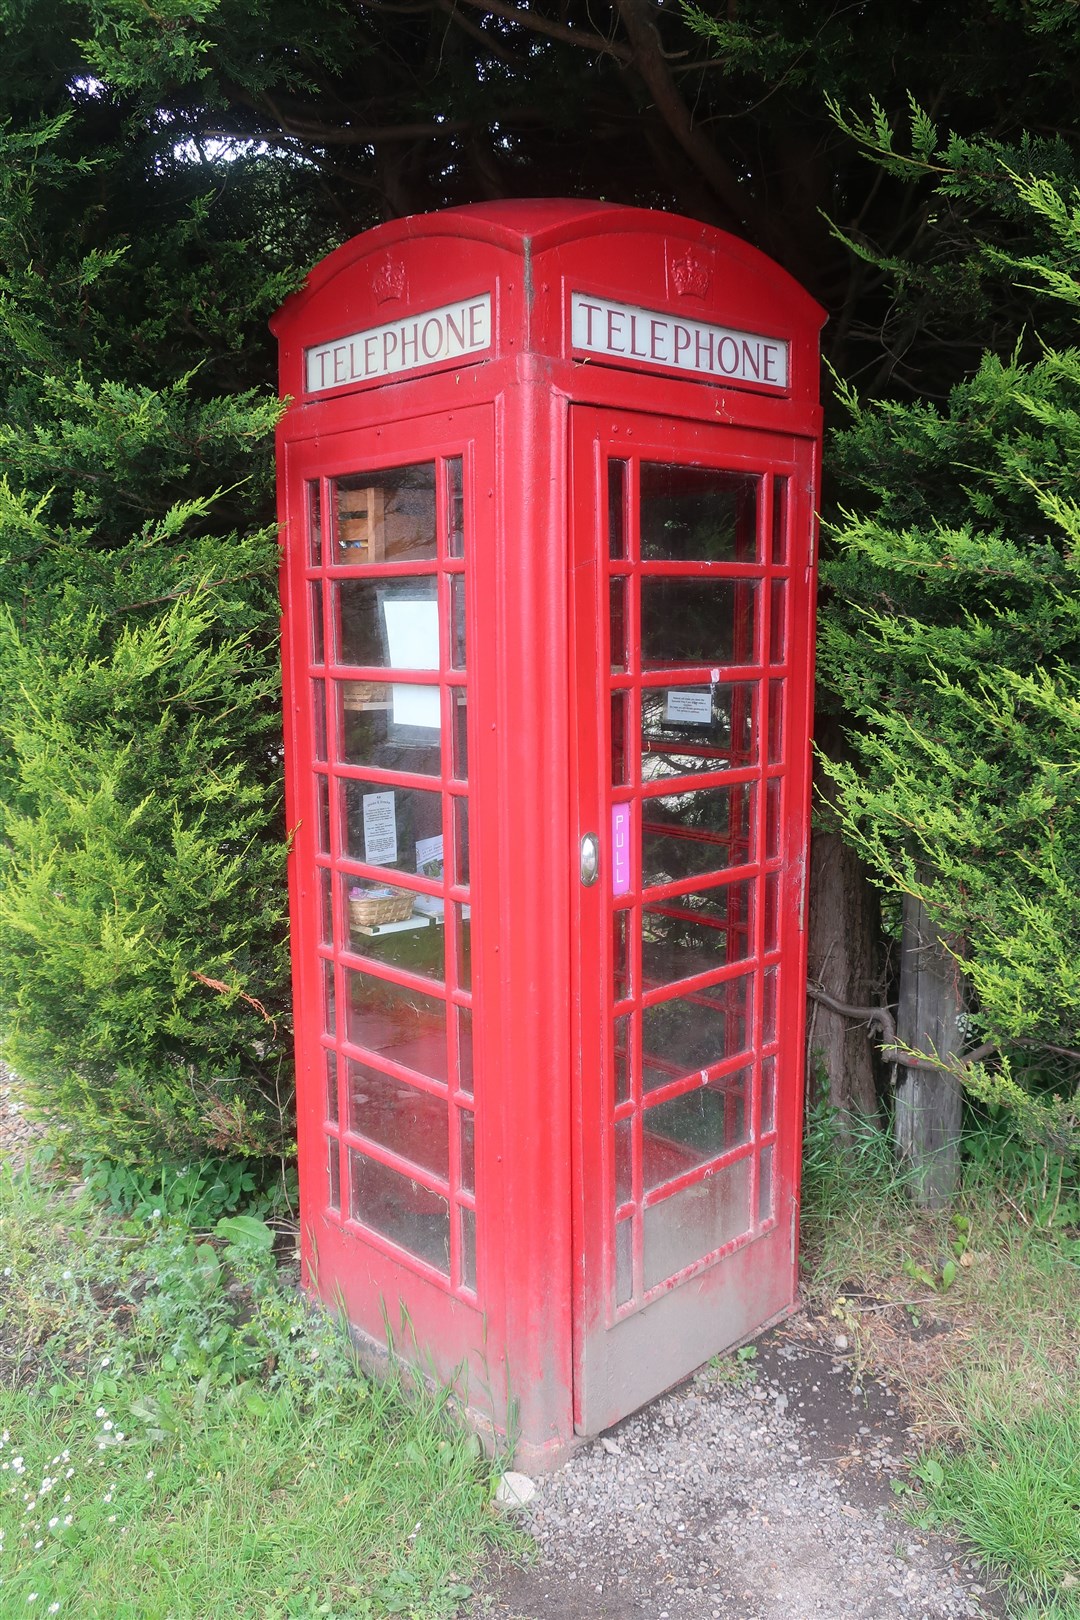 An old red phone box at Carron is now a snack shack which takes donations for hungry or thirsty passers-by.